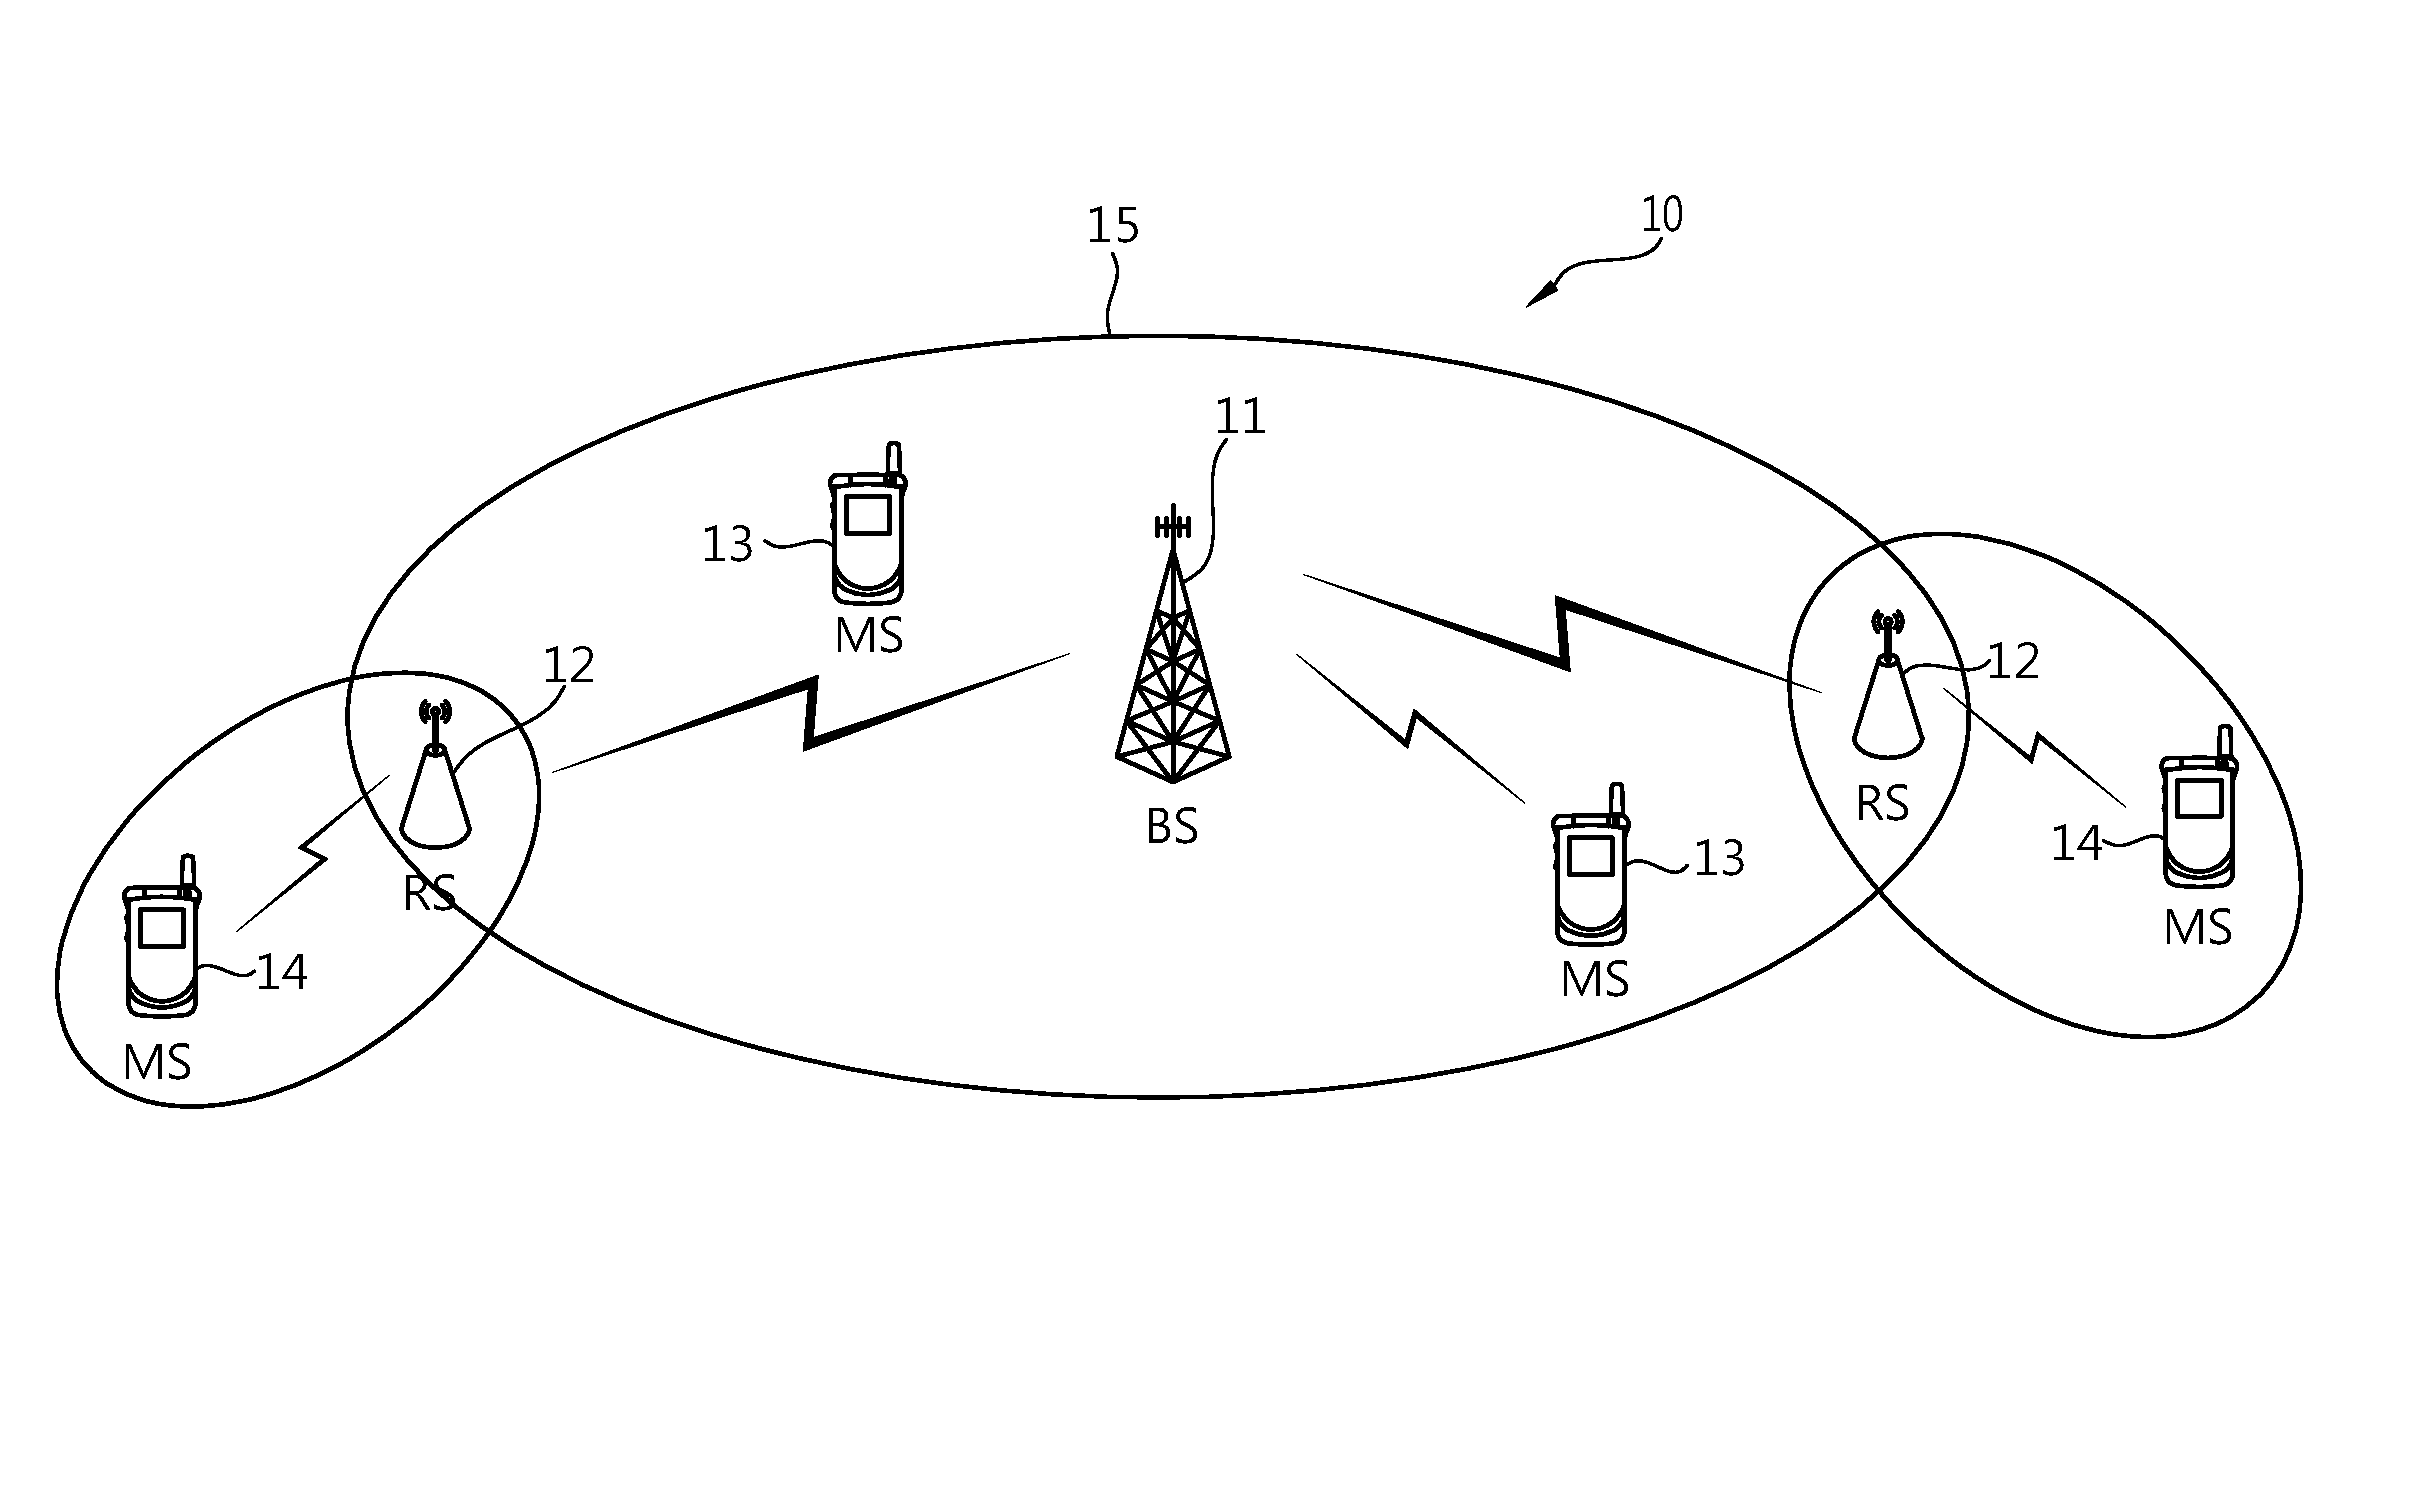 Method and apparatus for transmitting/receiving a signal in a wireless communication system